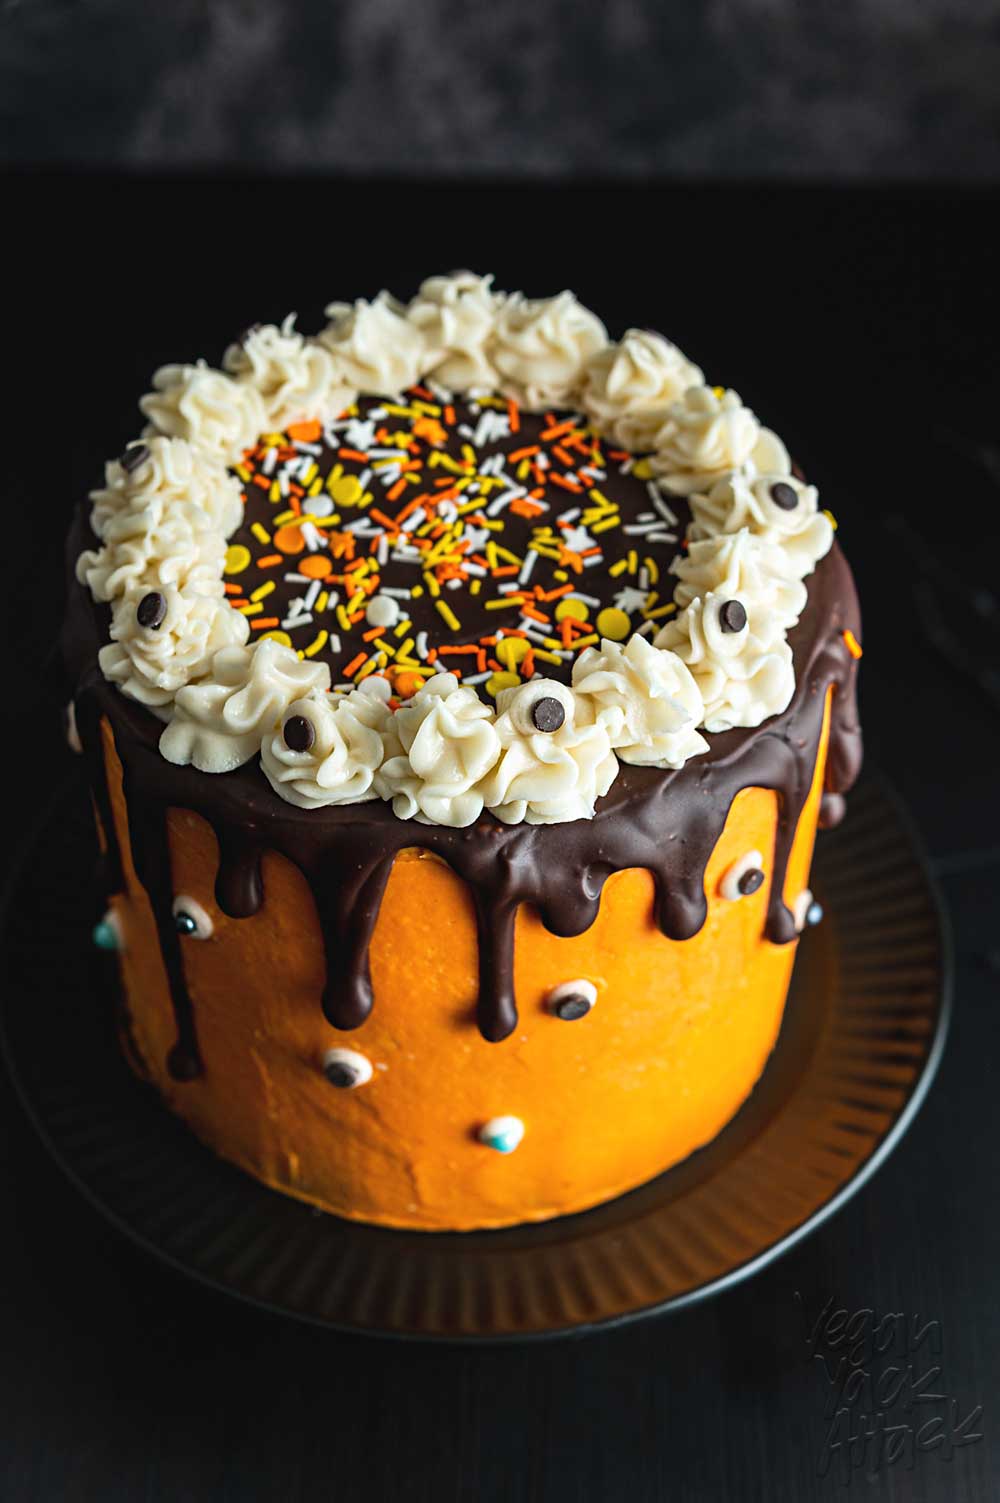 Orange frosting covered a marbled layer cake, with sprinkles